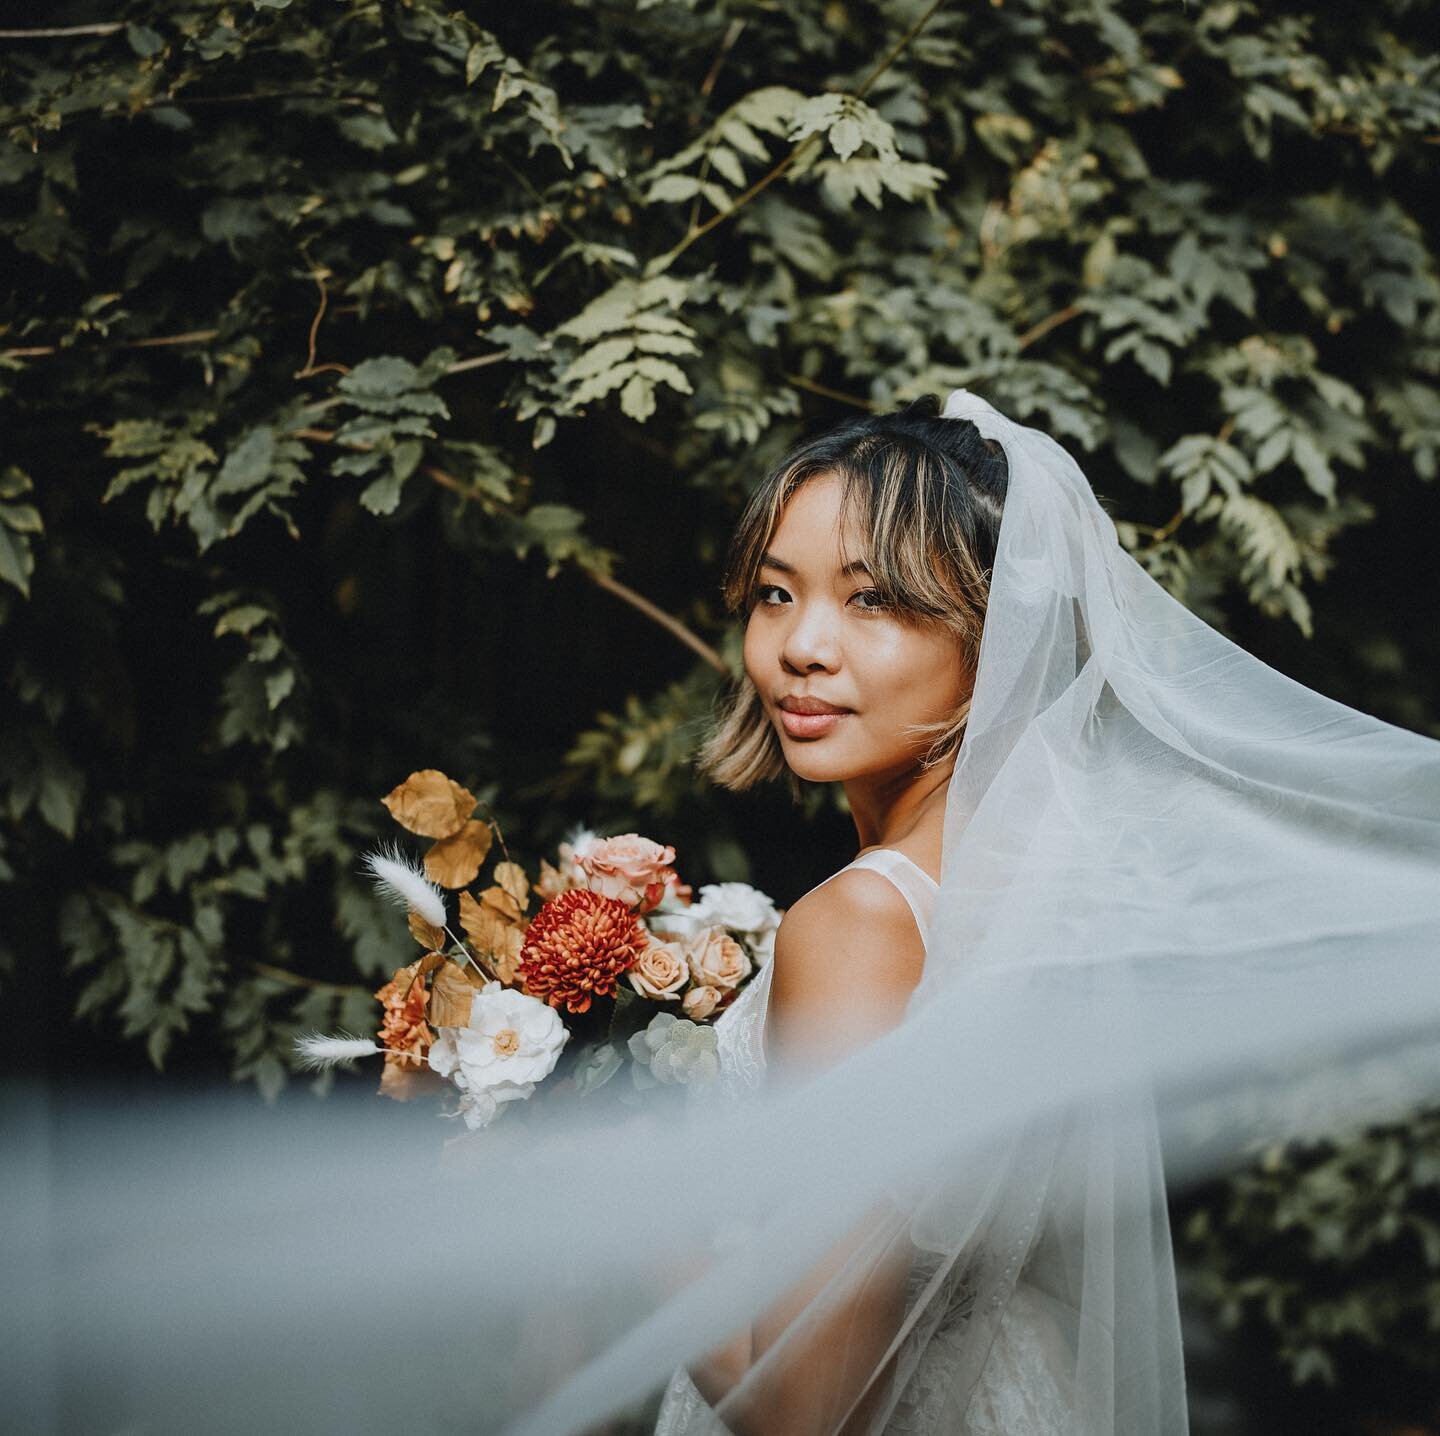 Hot tip! 📣Hire a team of vendors who can make you feel like a BOSS on your wedding day! There&rsquo;s nothing better than knowing your big day is in the hands of capable, talented individuals. Take some time to ask questions and get to know your ven